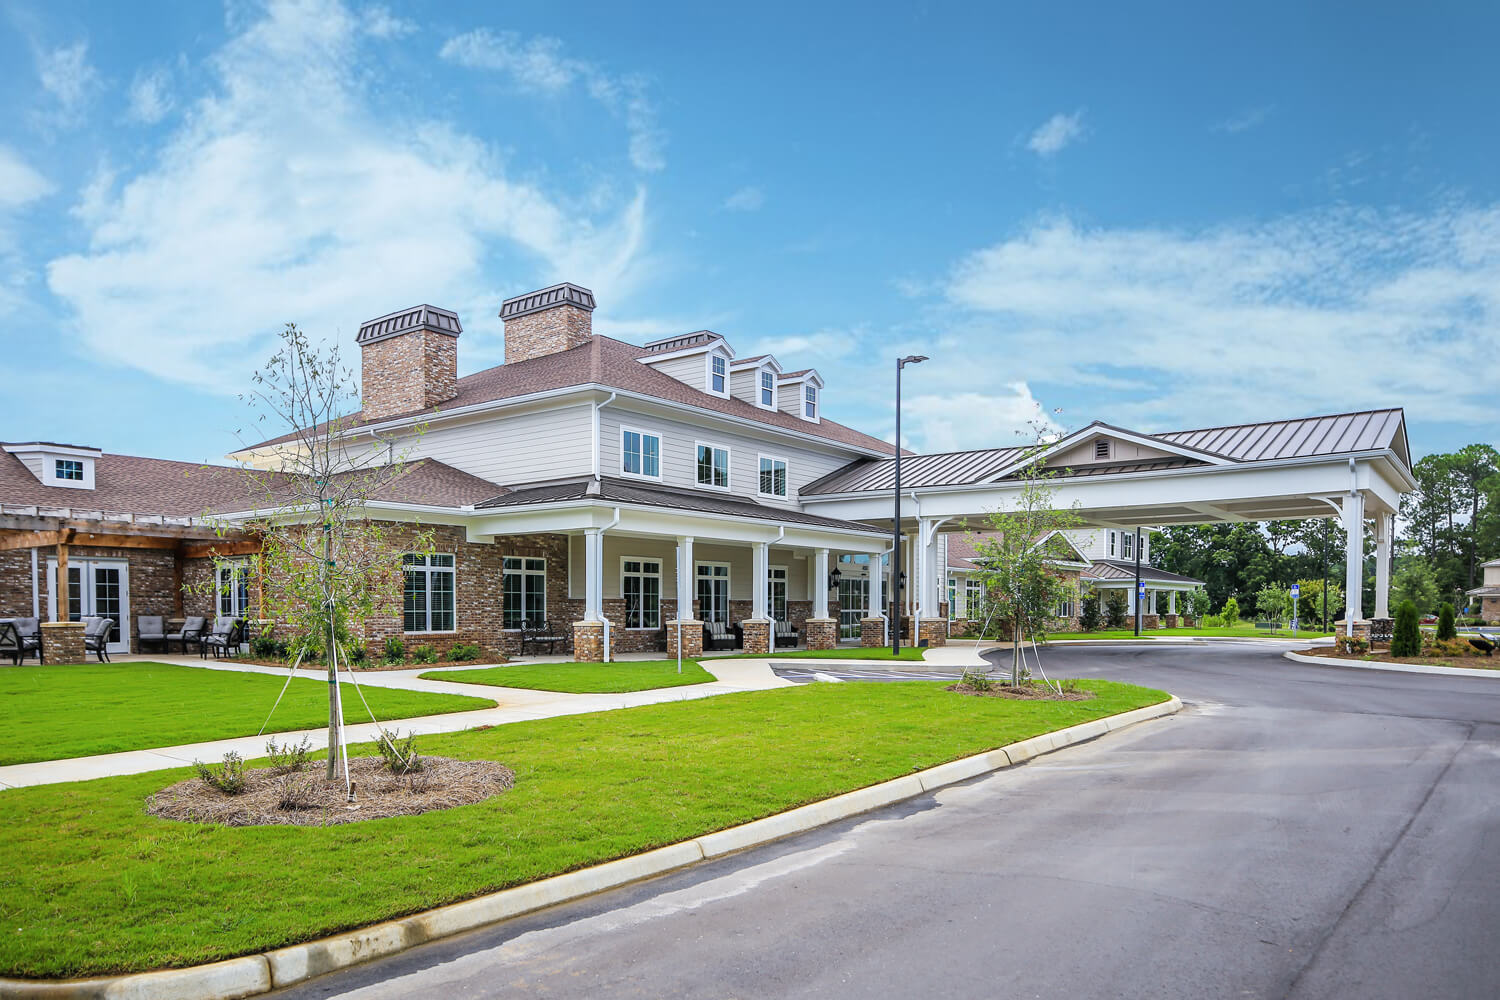 Grand South Senior Living - Exterior Entrance - Designed by Foshee Architecture